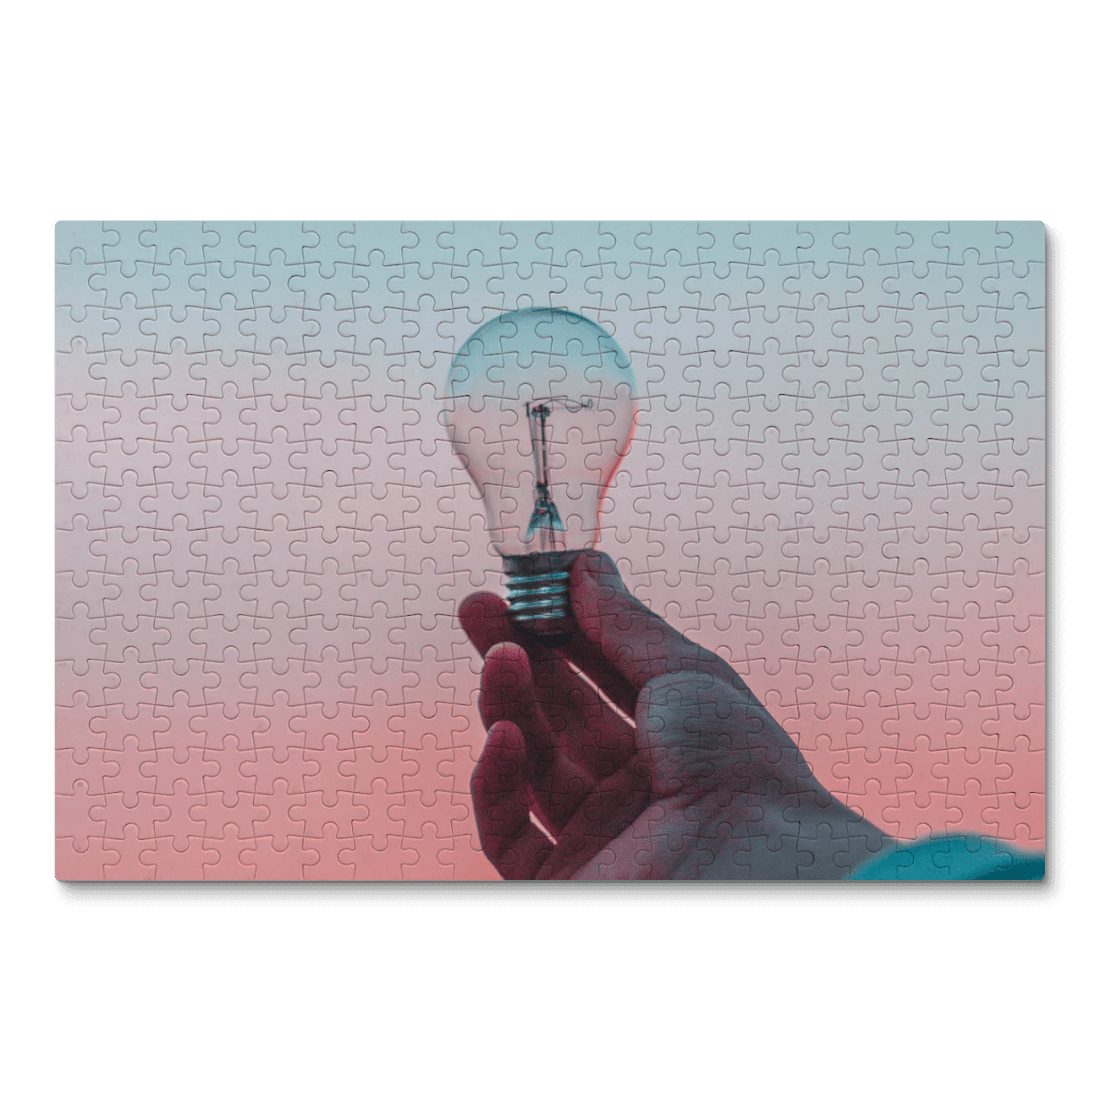 A picture of a hand holding a light bulb with a gradient background on a puzzle